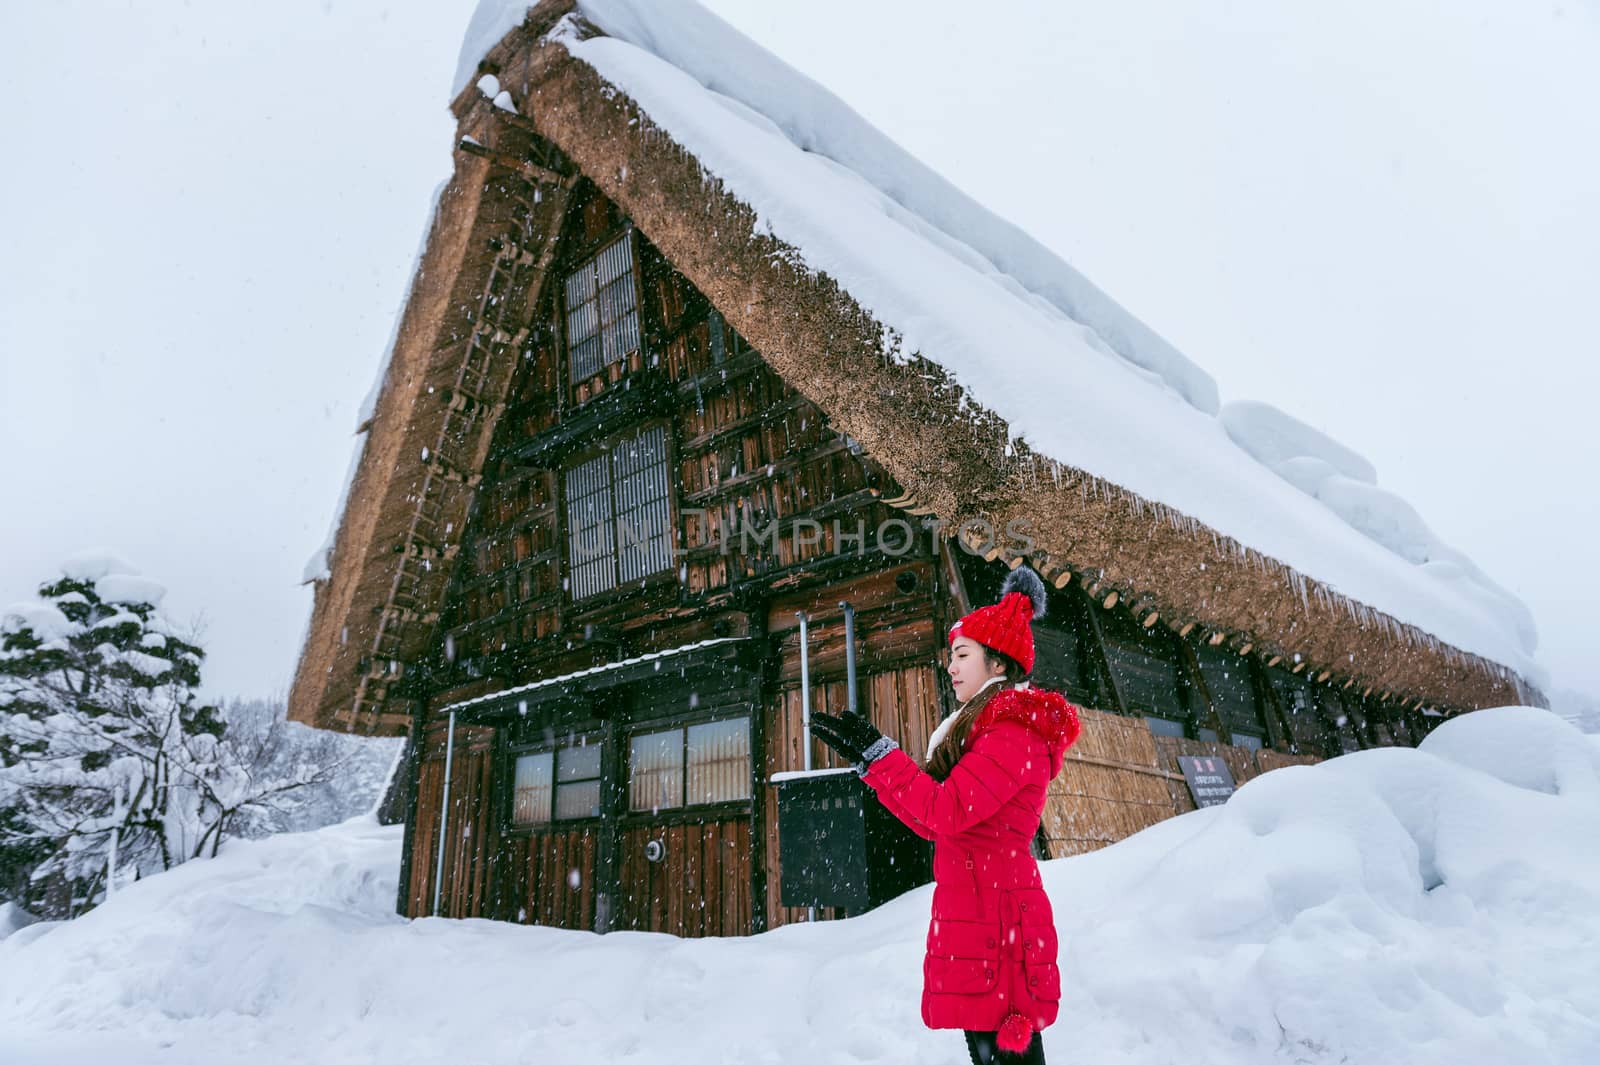 Young woman in Shirakawa-go village in winter, UNESCO world heritage sites, Japan.